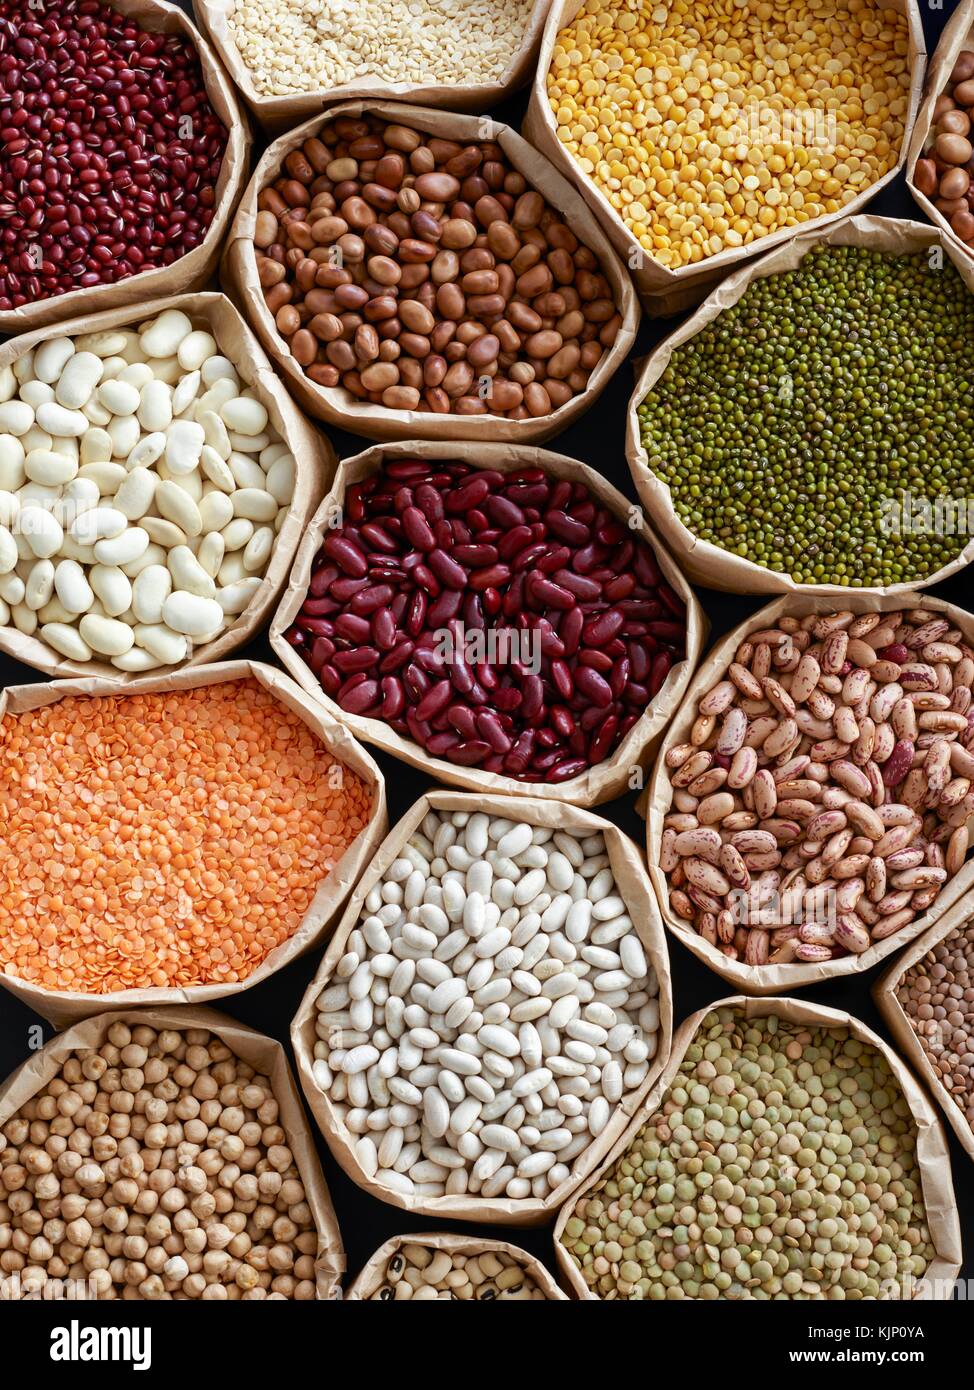 Pulses in paper bags, overhead view. Stock Photo